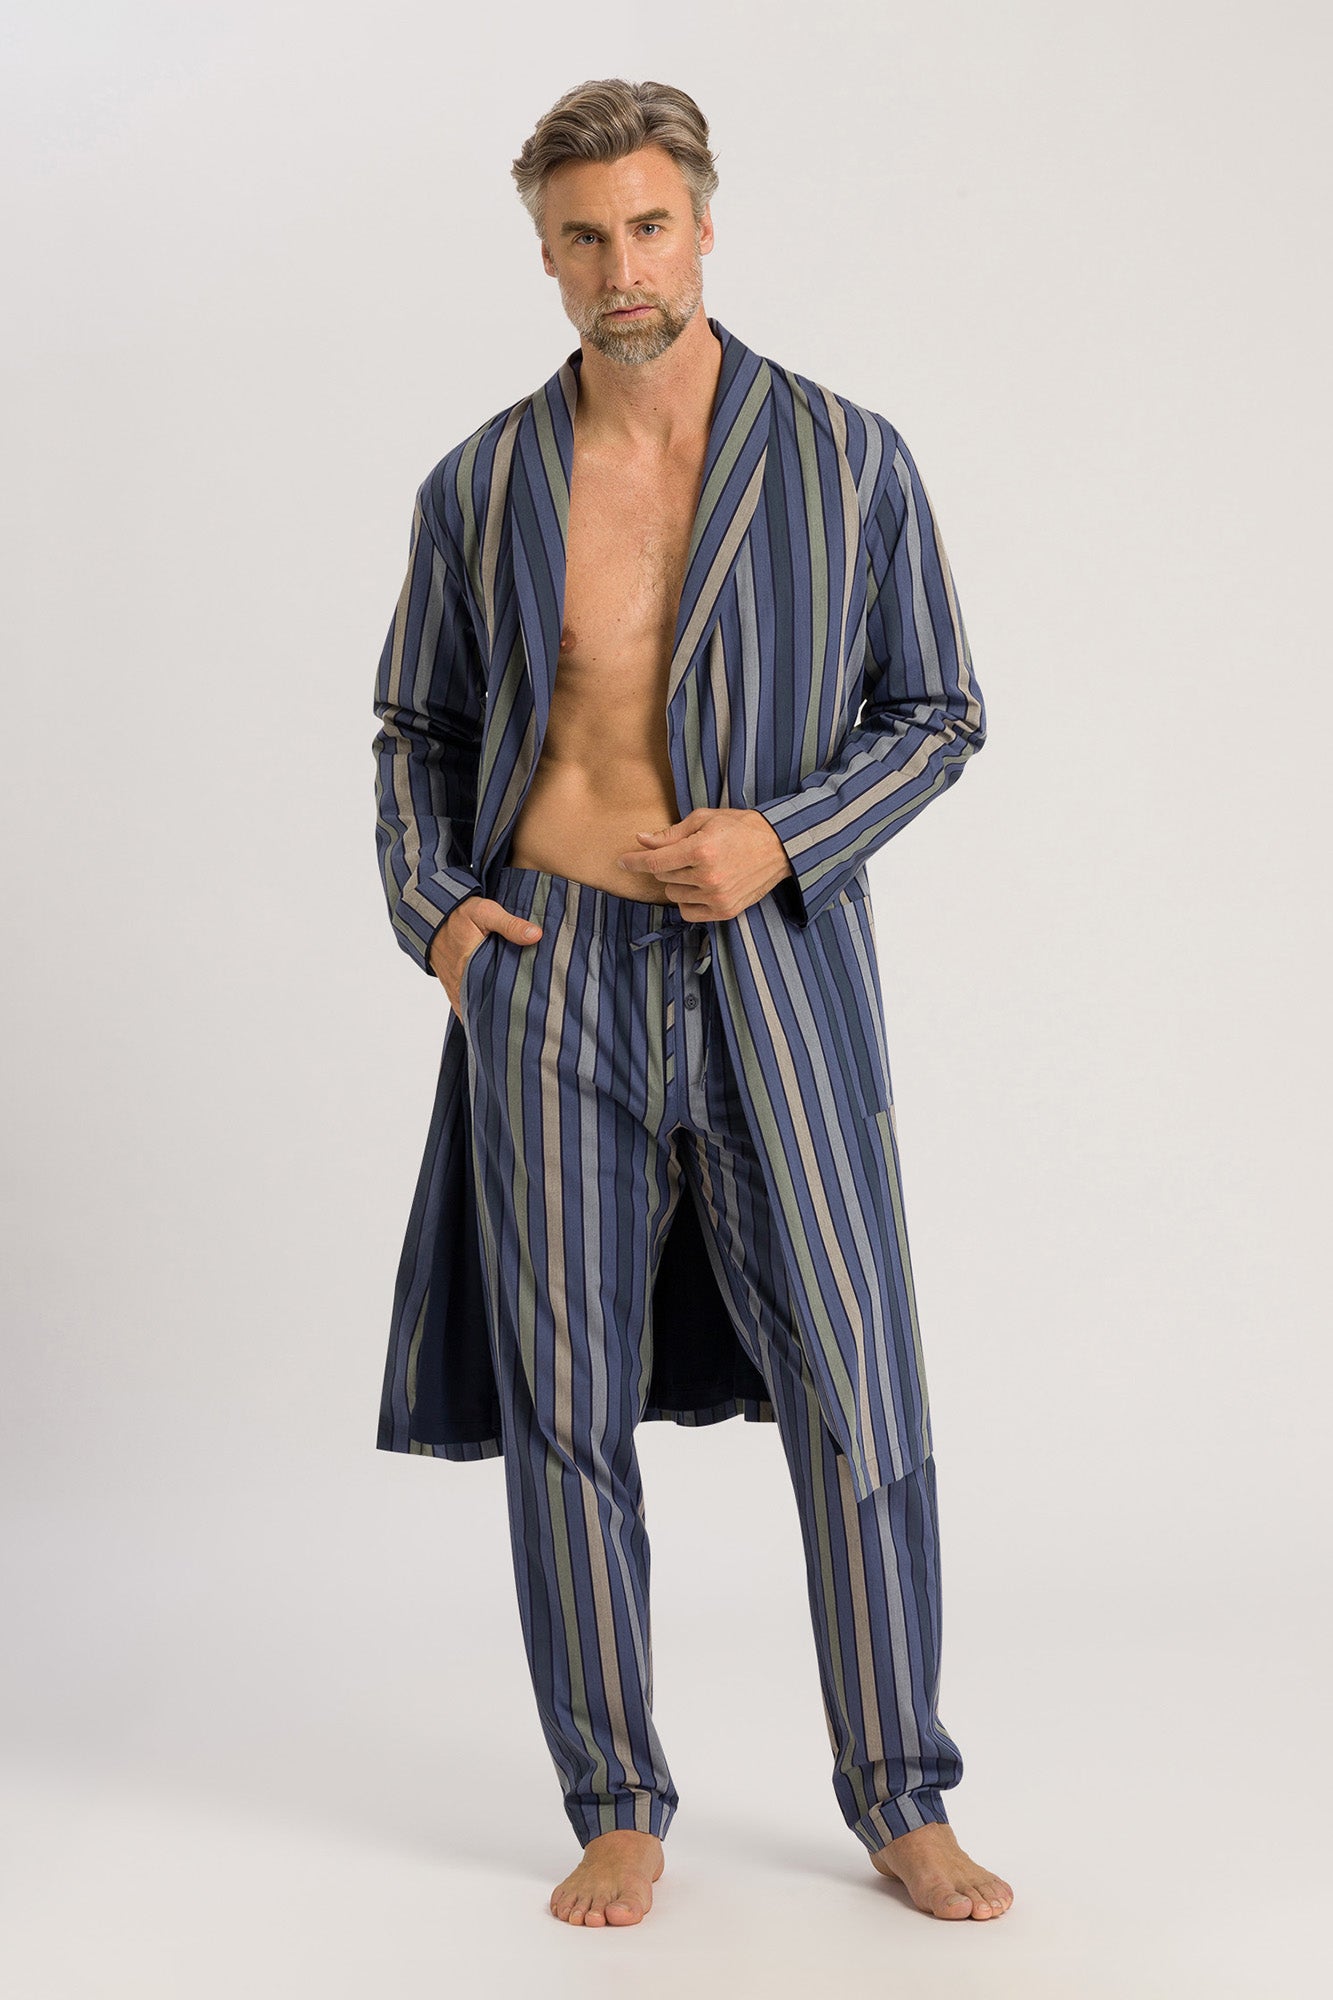 The Night & Day Robe By HANRO In Everblue Stripe